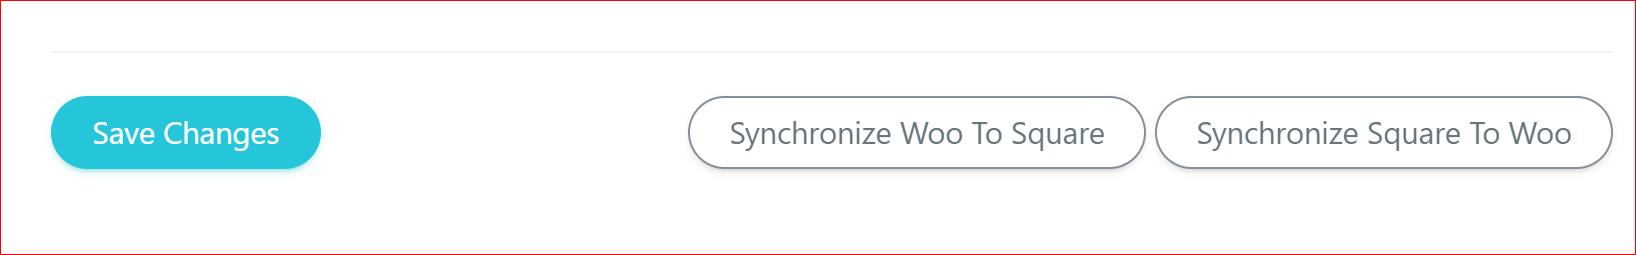 Save changes to sync your products